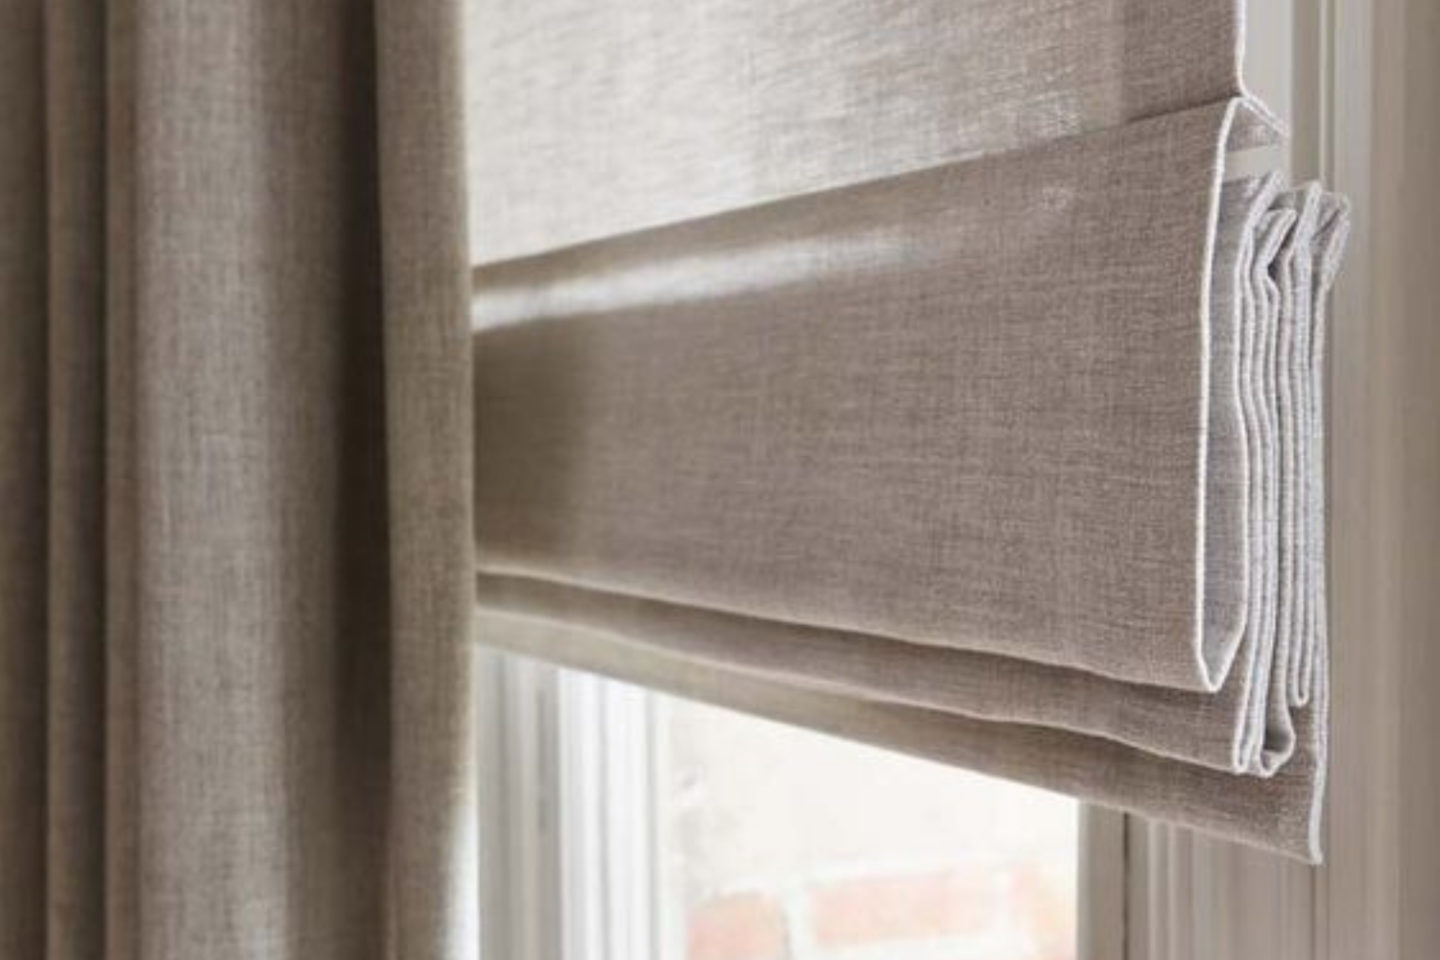 Window furnishings, blinds and curtains